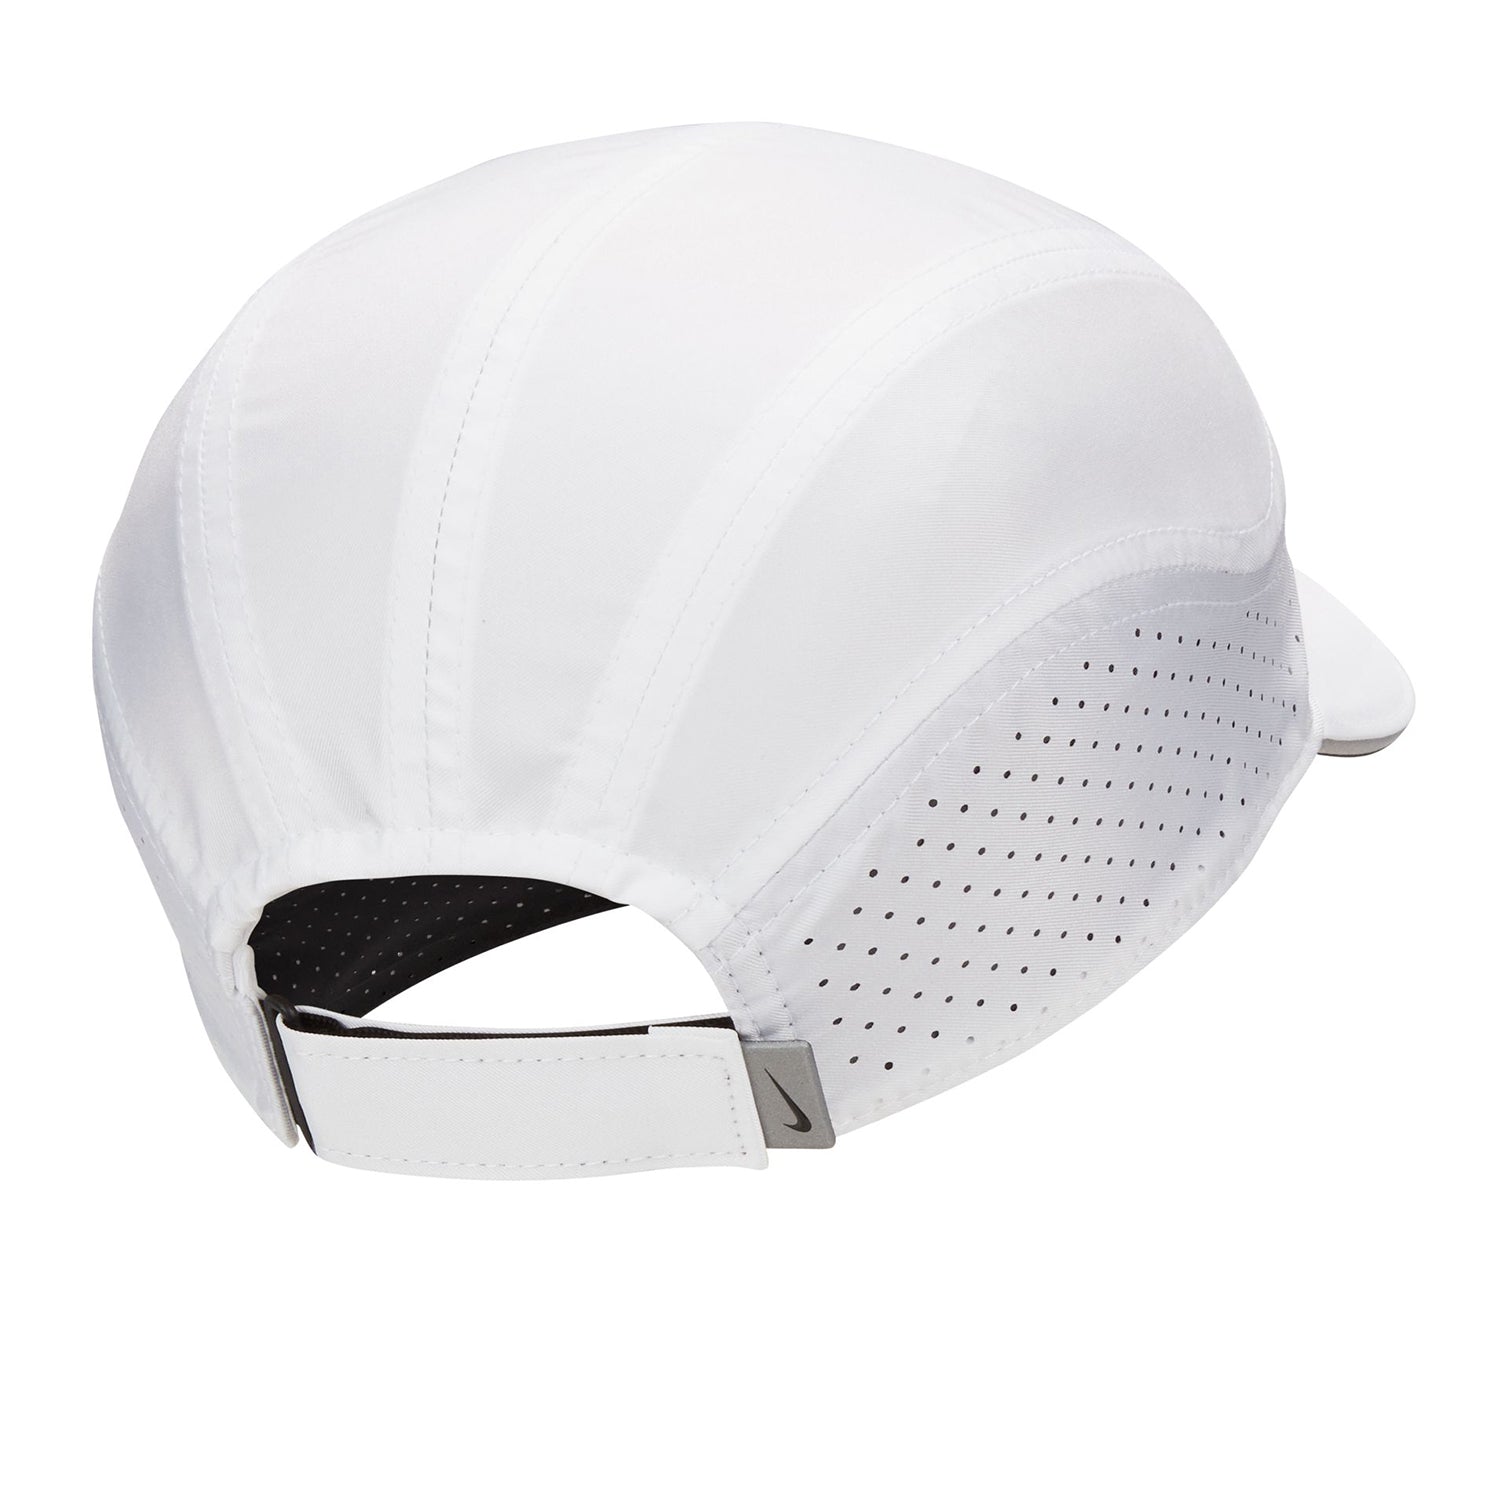 Dri-FIT ADV Fly Unstructured Reflective Cap